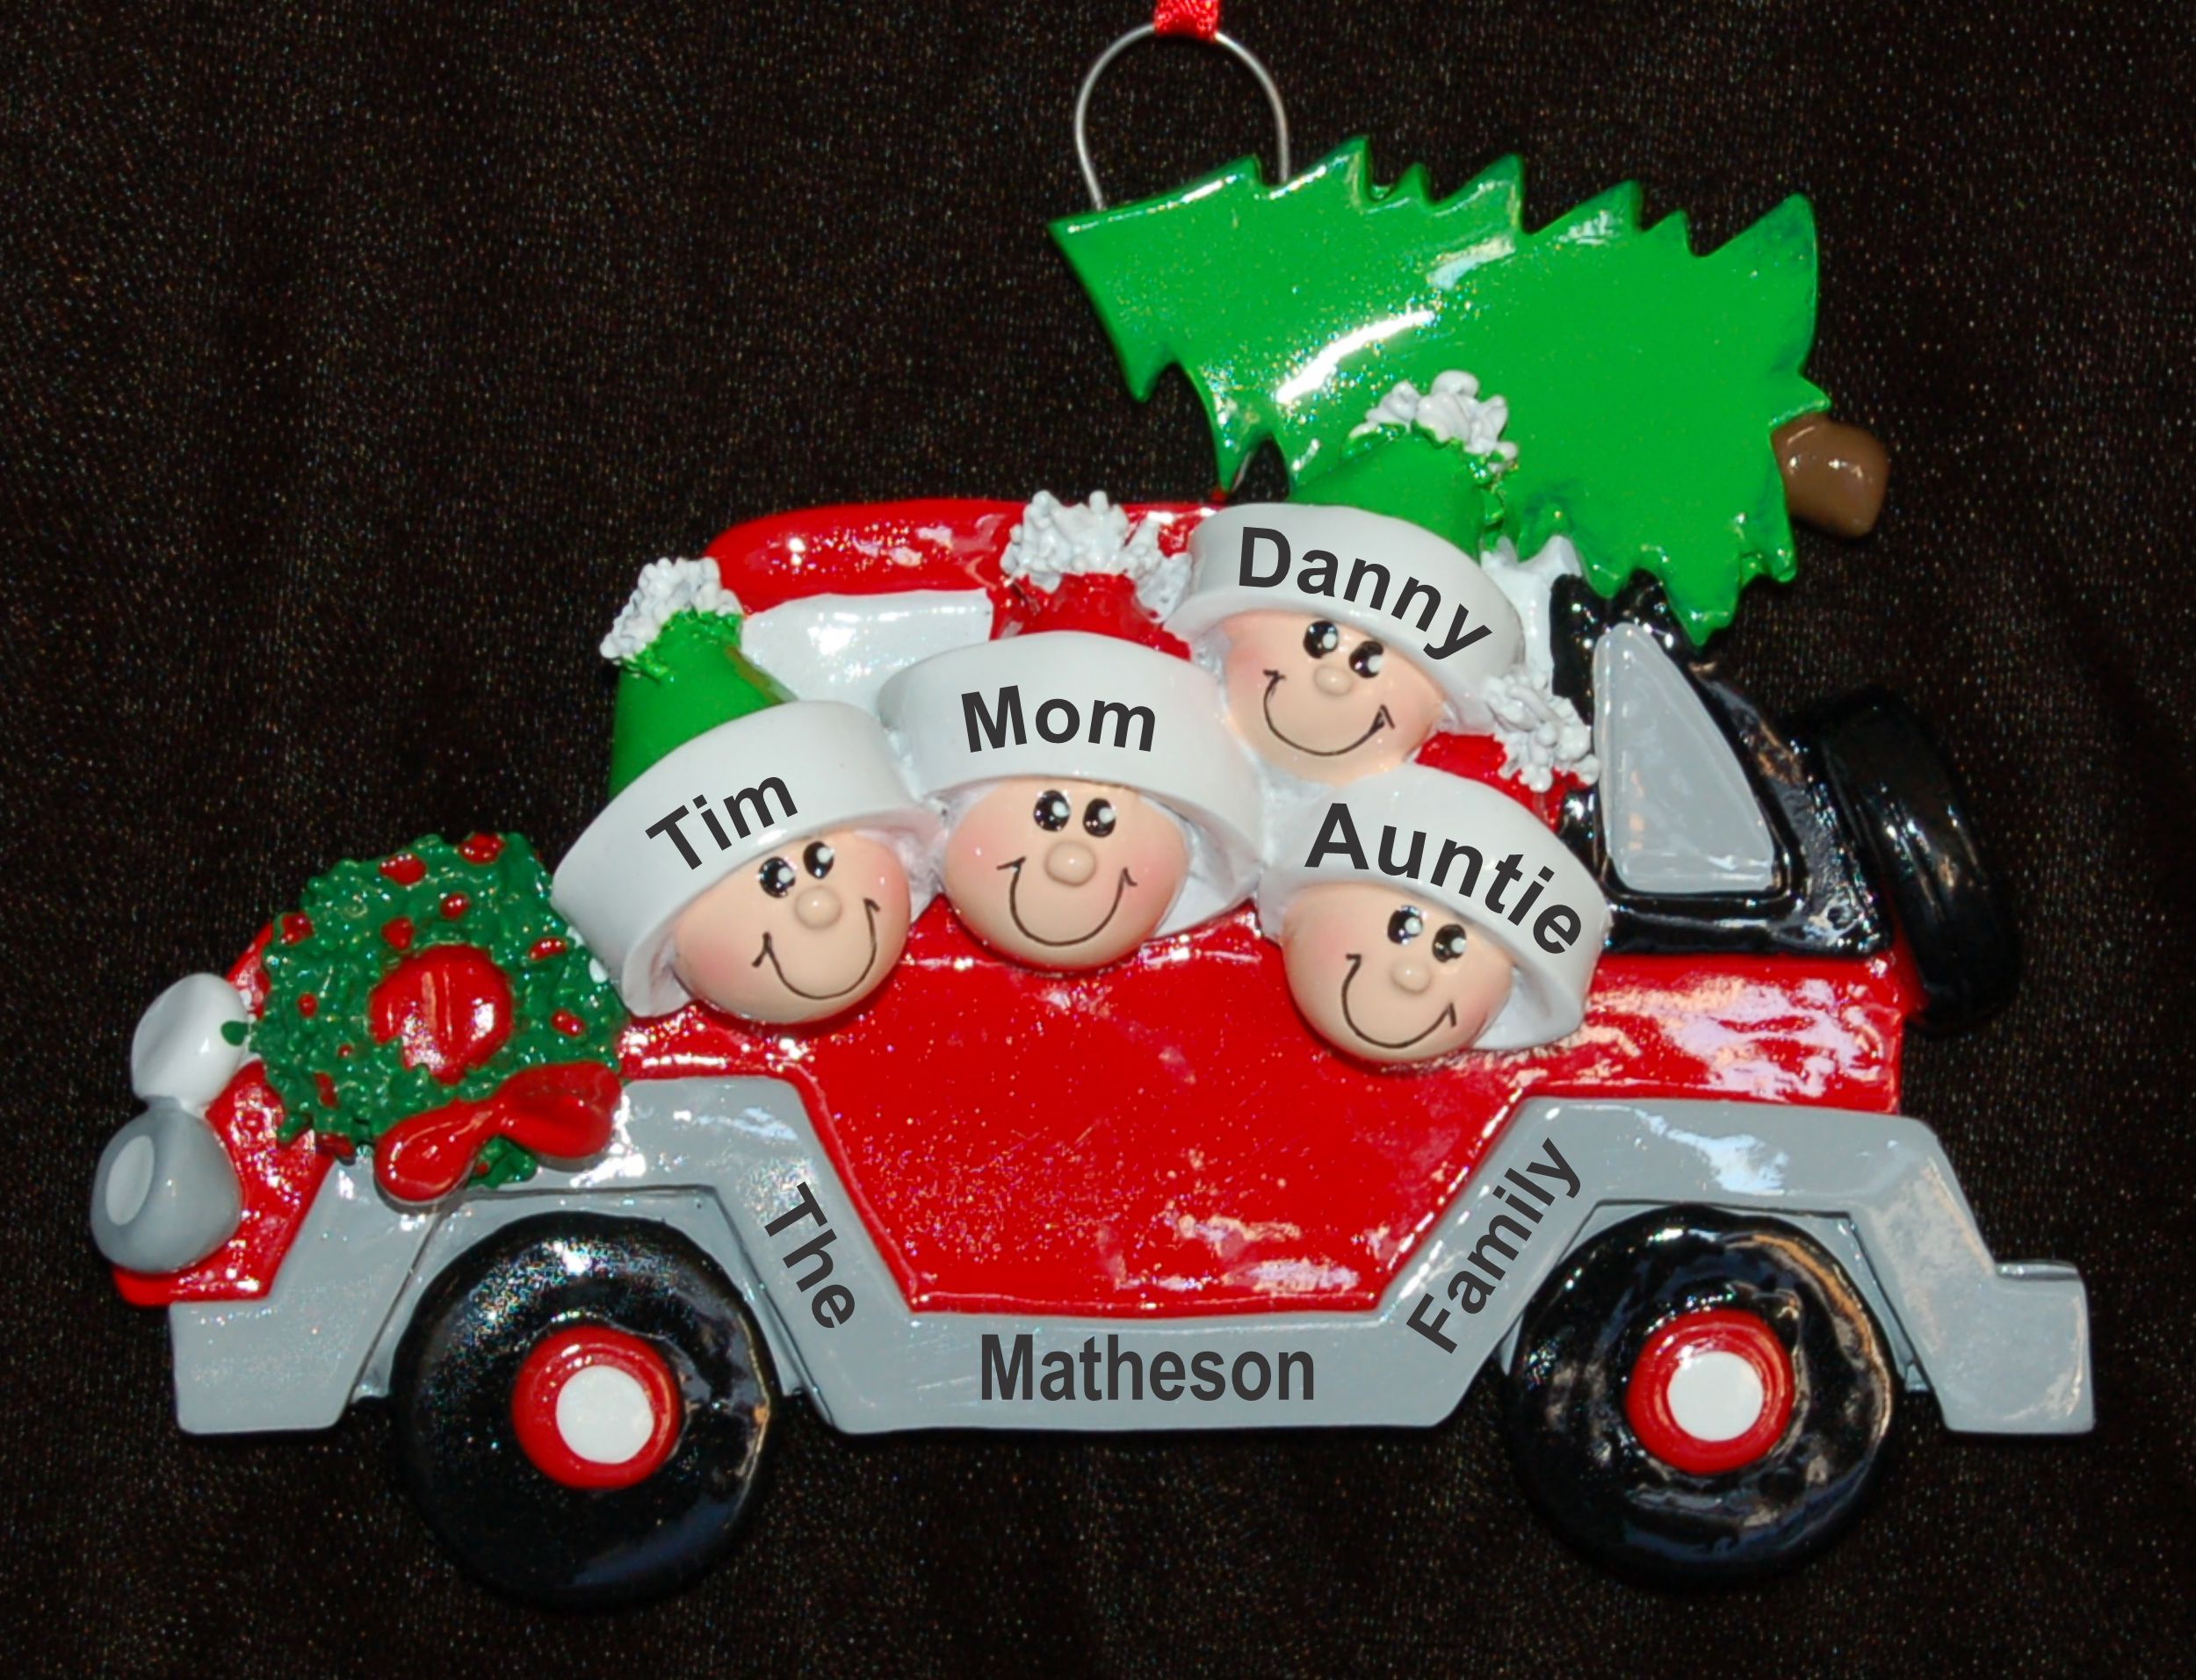 Family Christmas Ornament Let's Get the Tree 4 Personalized by RussellRhodes.com